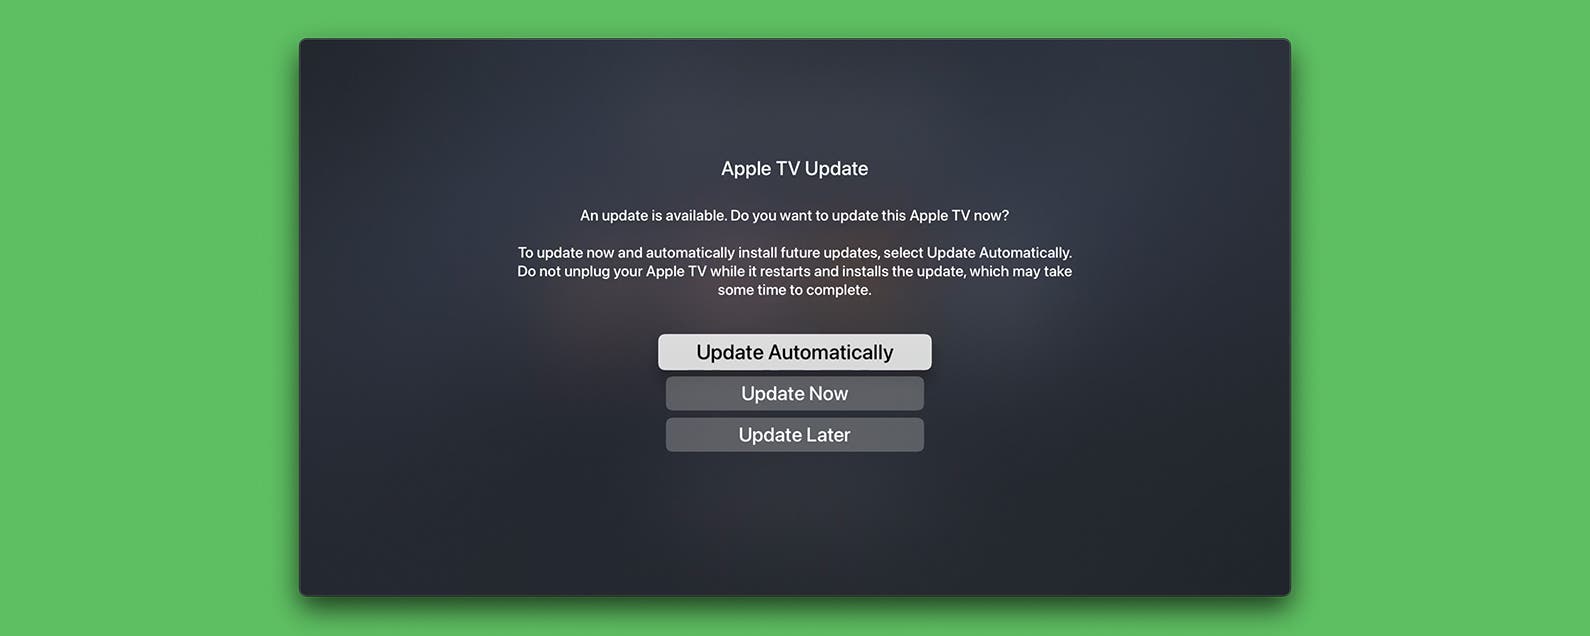 How to Update TV